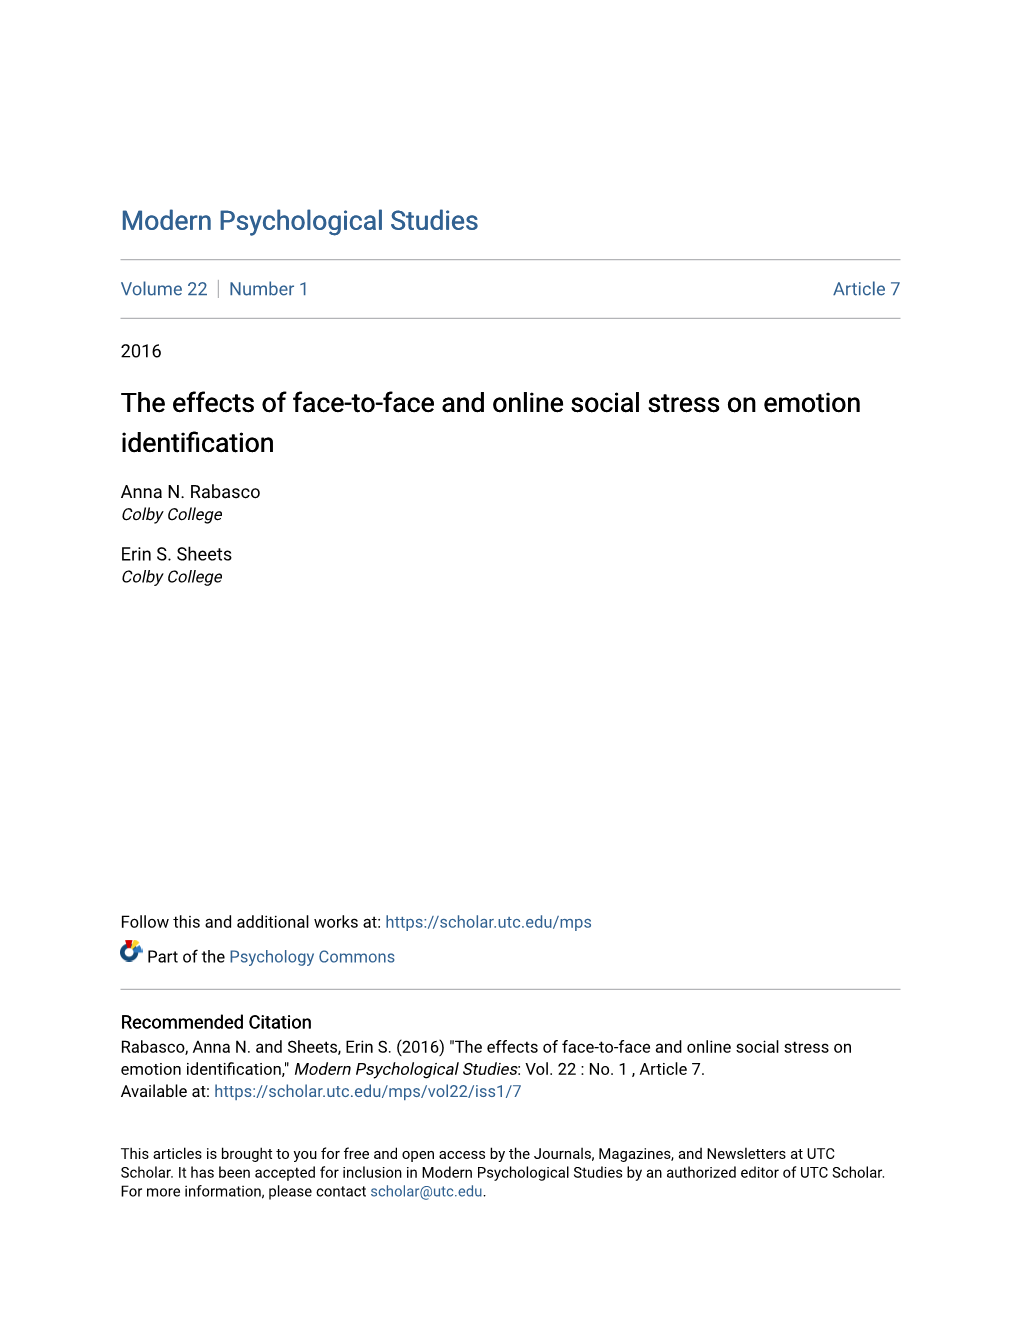 The Effects of Face-To-Face and Online Social Stress on Emotion Identification